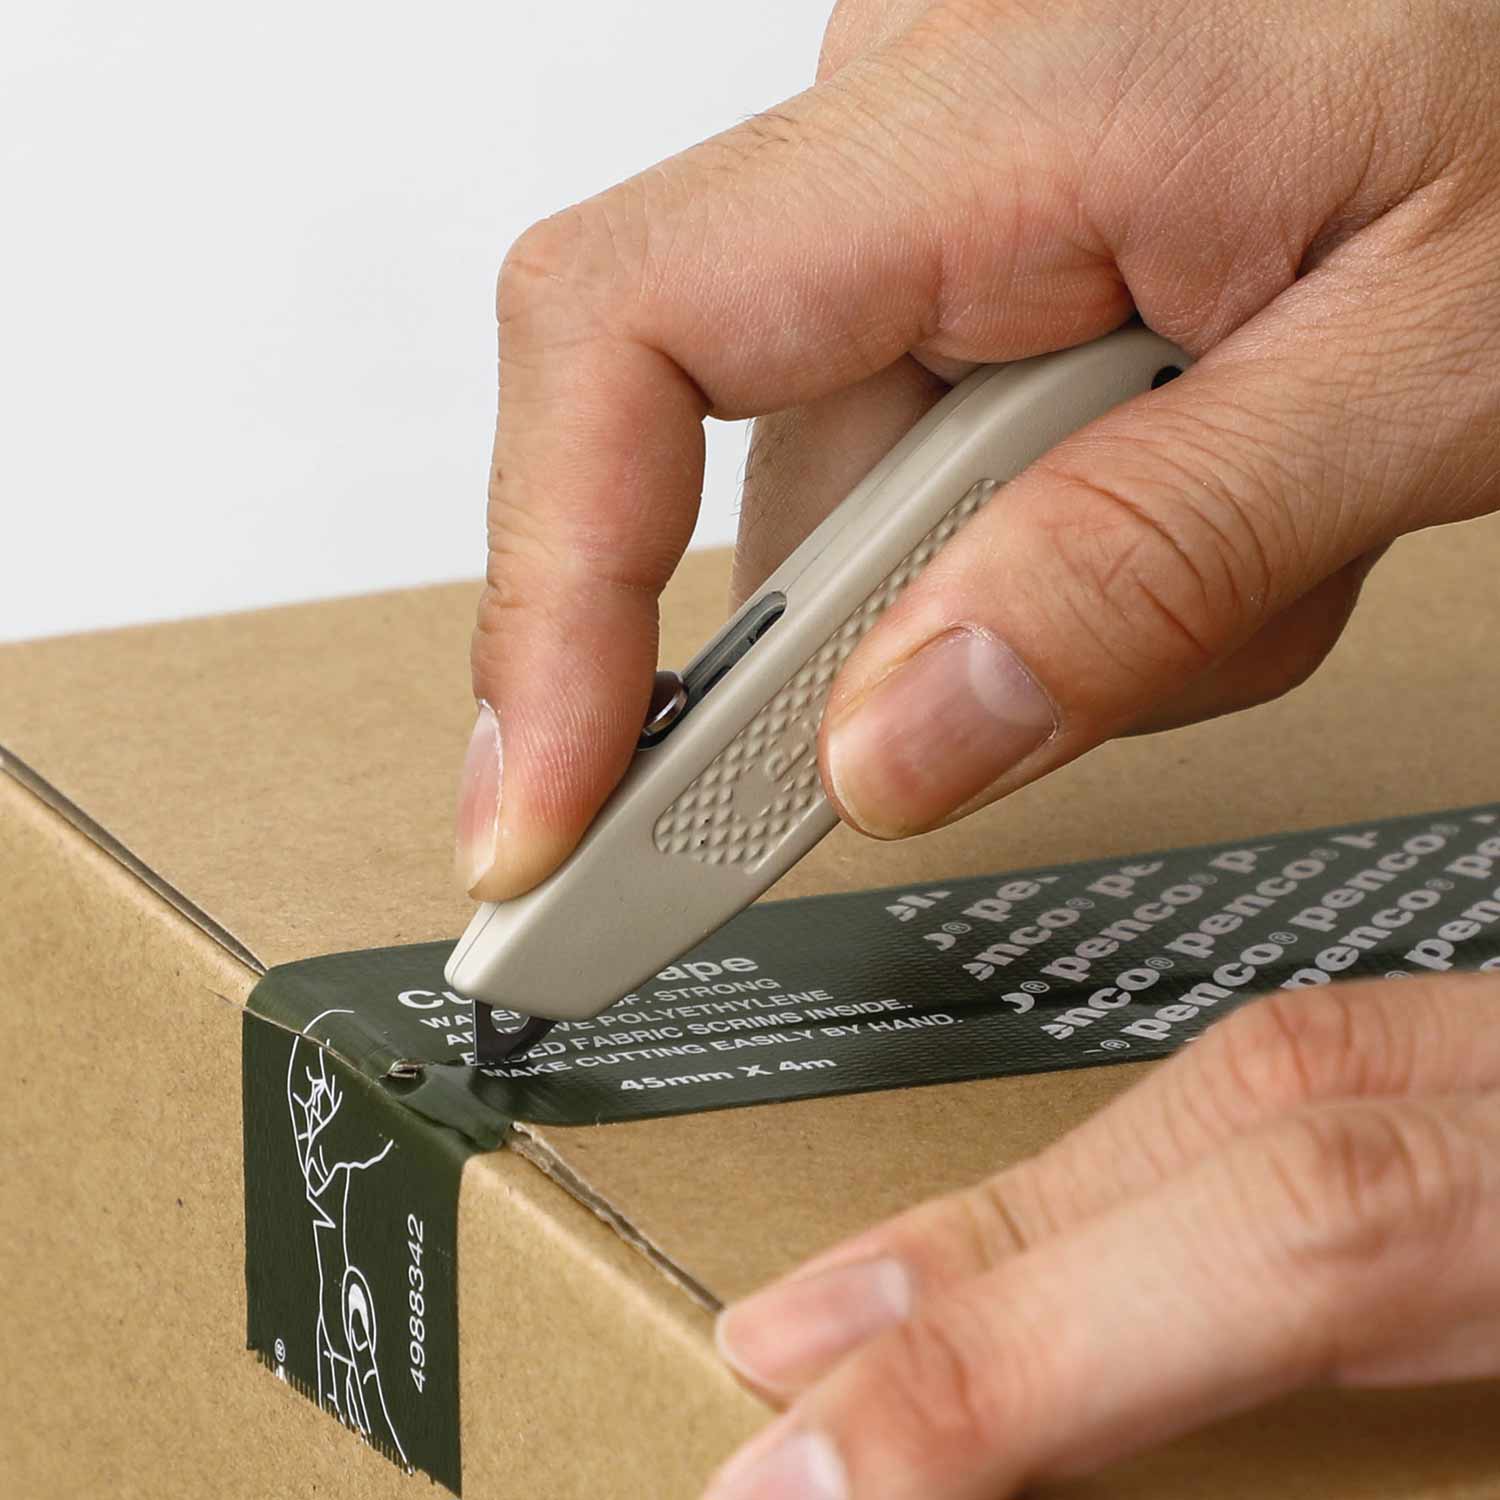 UTILITY KNIFE - penco® stationery & supplies